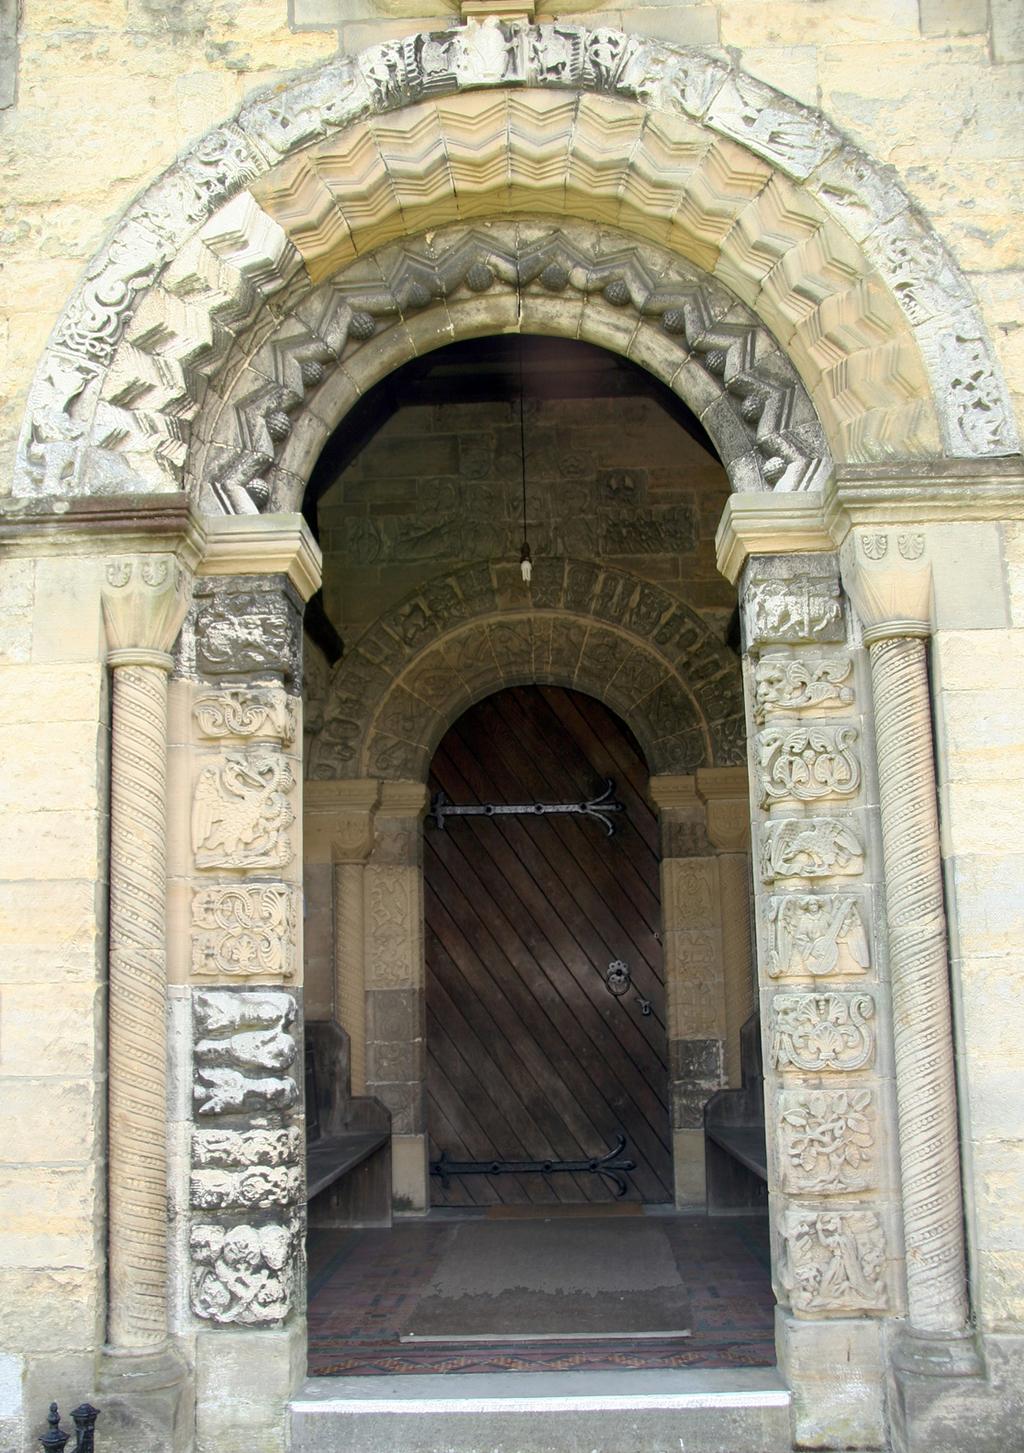 Doorways Yorkshire retains a wealth of surviving doorways from the later 12th century, with decorative carvings that demonstrate a uniformity of style across the region (Zarnecki 1953, 35).